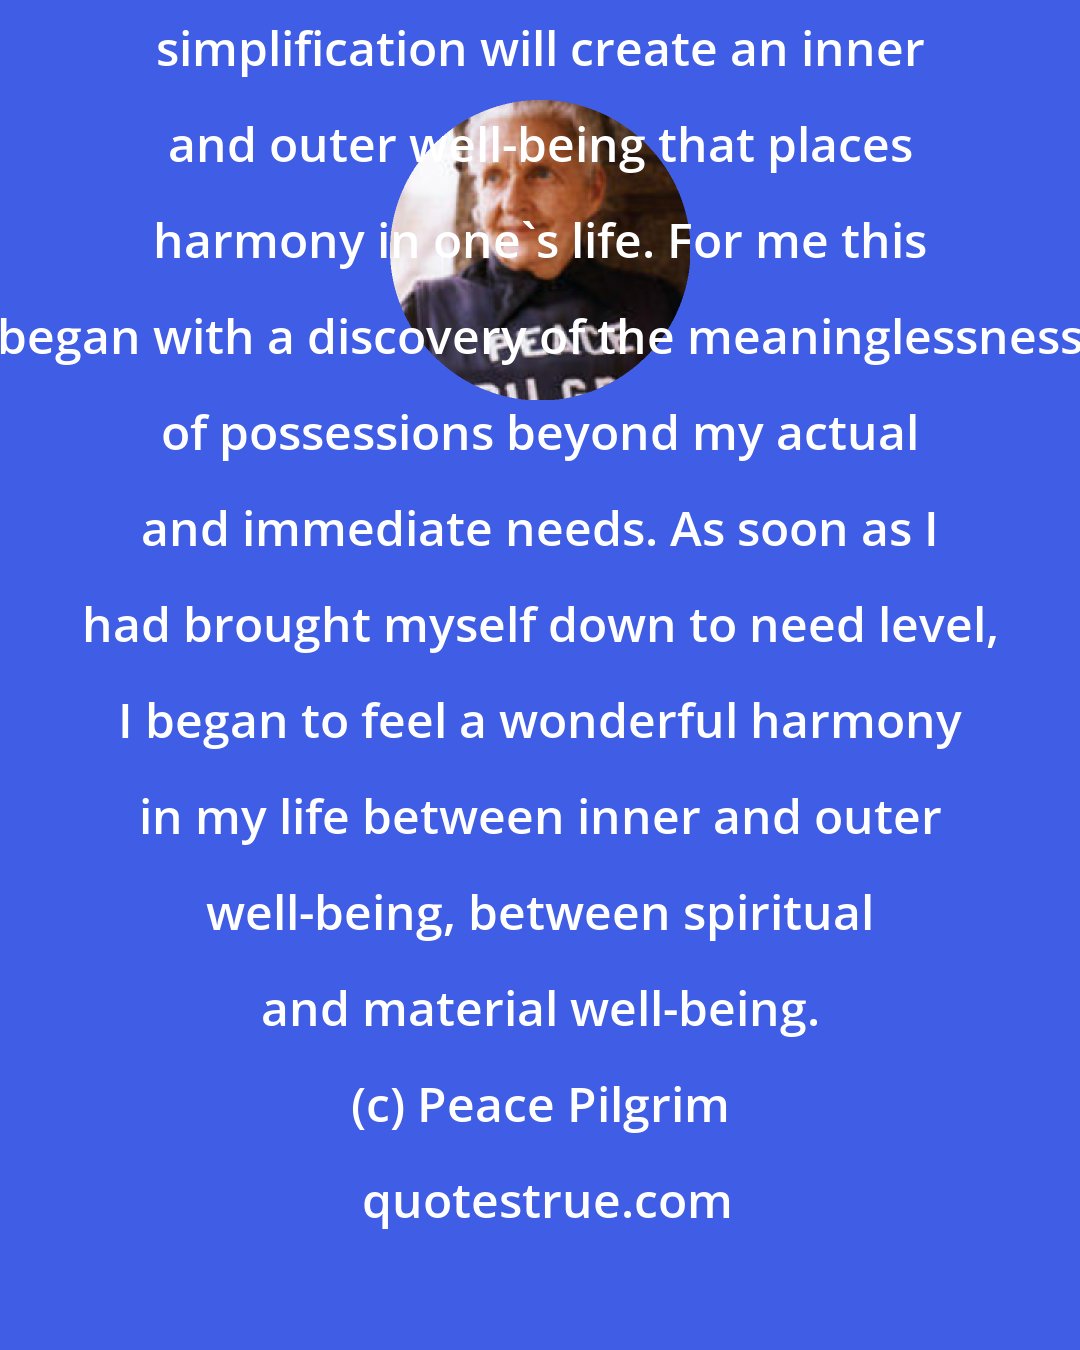 Peace Pilgrim: The simplification of life is one of the steps to inner peace. A persistent simplification will create an inner and outer well-being that places harmony in one's life. For me this began with a discovery of the meaninglessness of possessions beyond my actual and immediate needs. As soon as I had brought myself down to need level, I began to feel a wonderful harmony in my life between inner and outer well-being, between spiritual and material well-being.